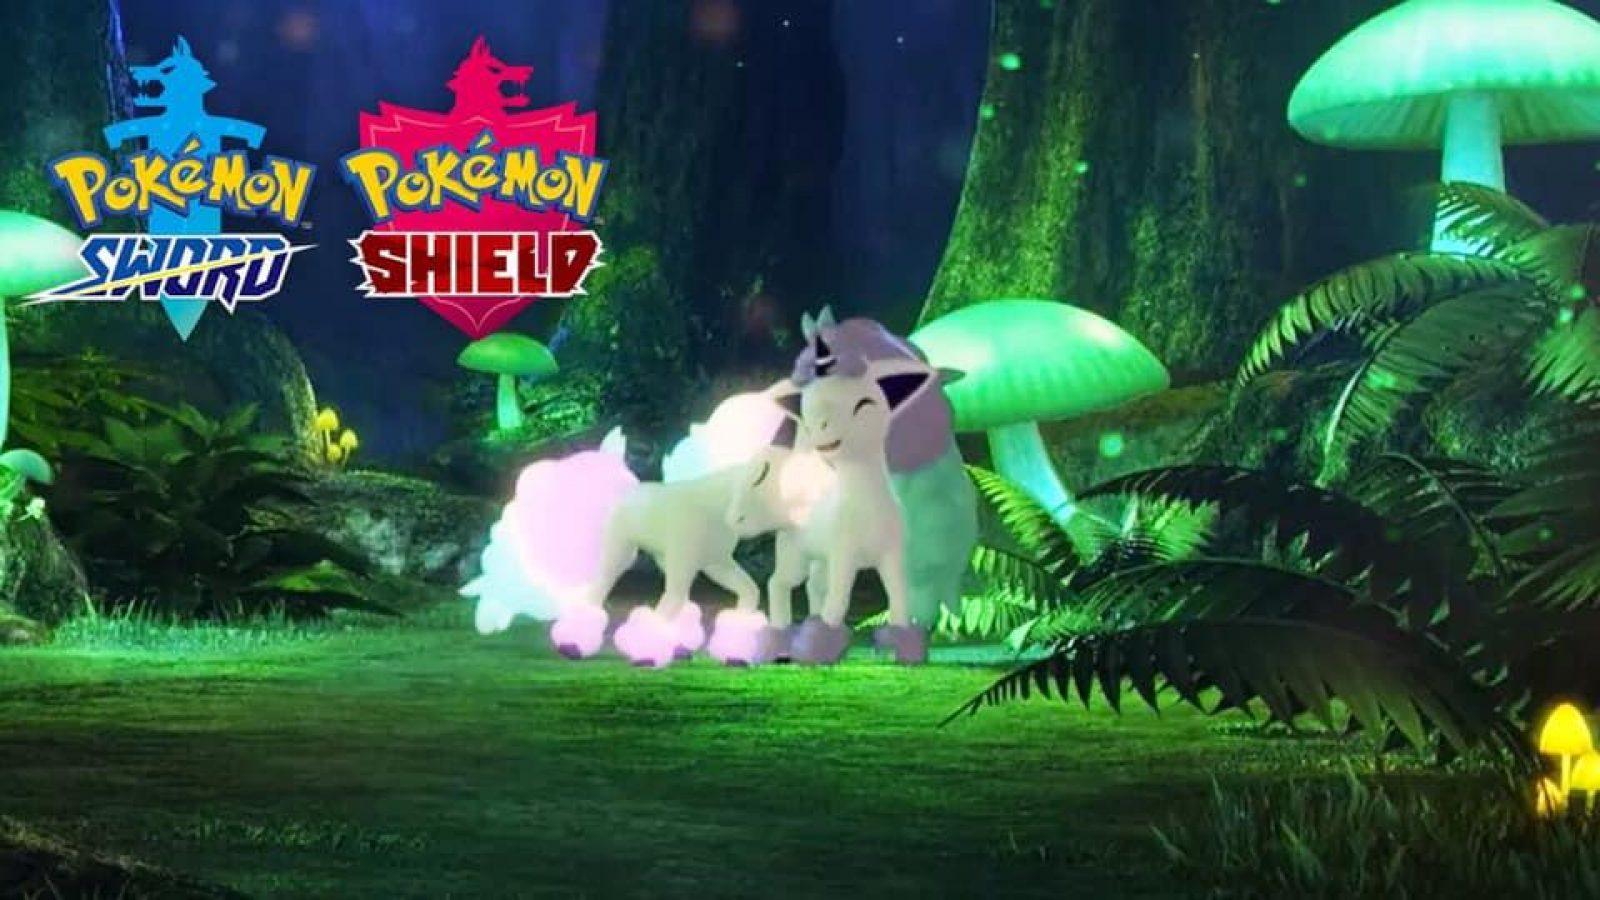 Was that a Galarian Ponyta in the Pokemon Sword and Shield